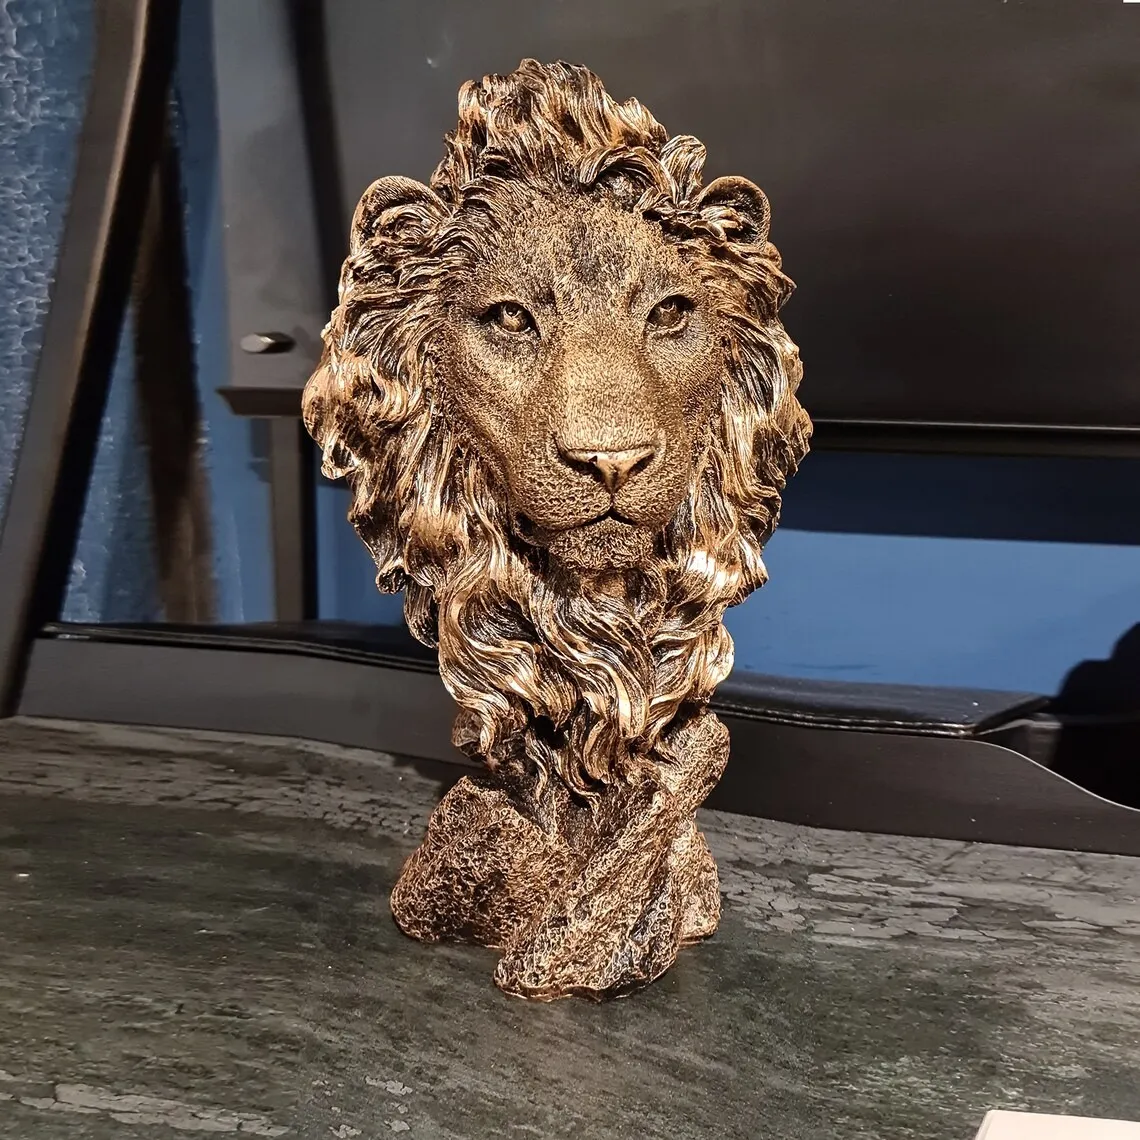 Lion Head Sculpture, Lion Gold Statue, Home Office Decor, Gift For Leading People, Christmas gift idea